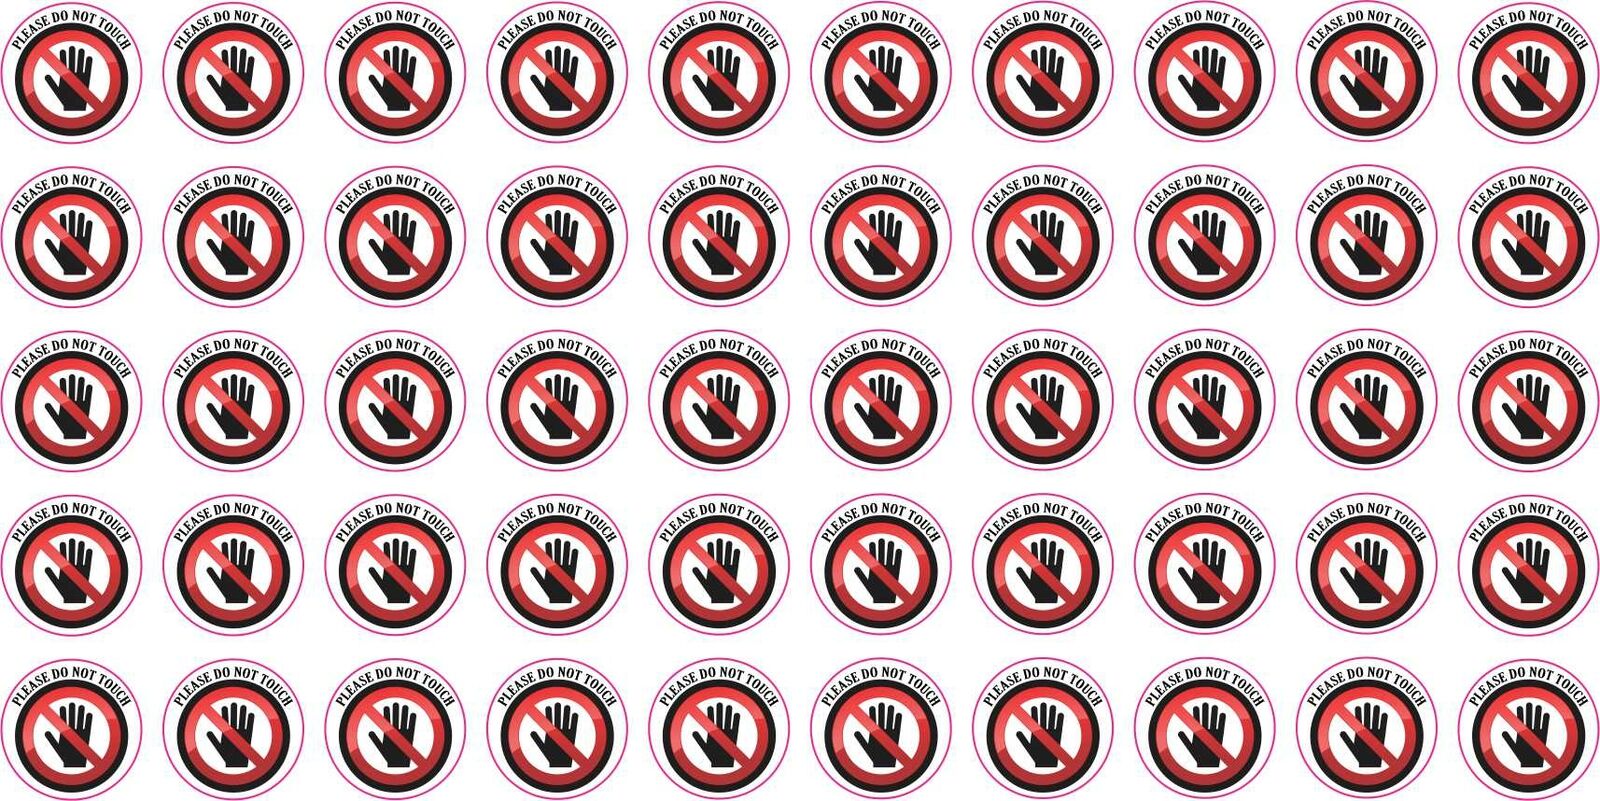 0.5in x 0.5in Please Do Not Touch Vinyl Stickers Business Sign Label Decals